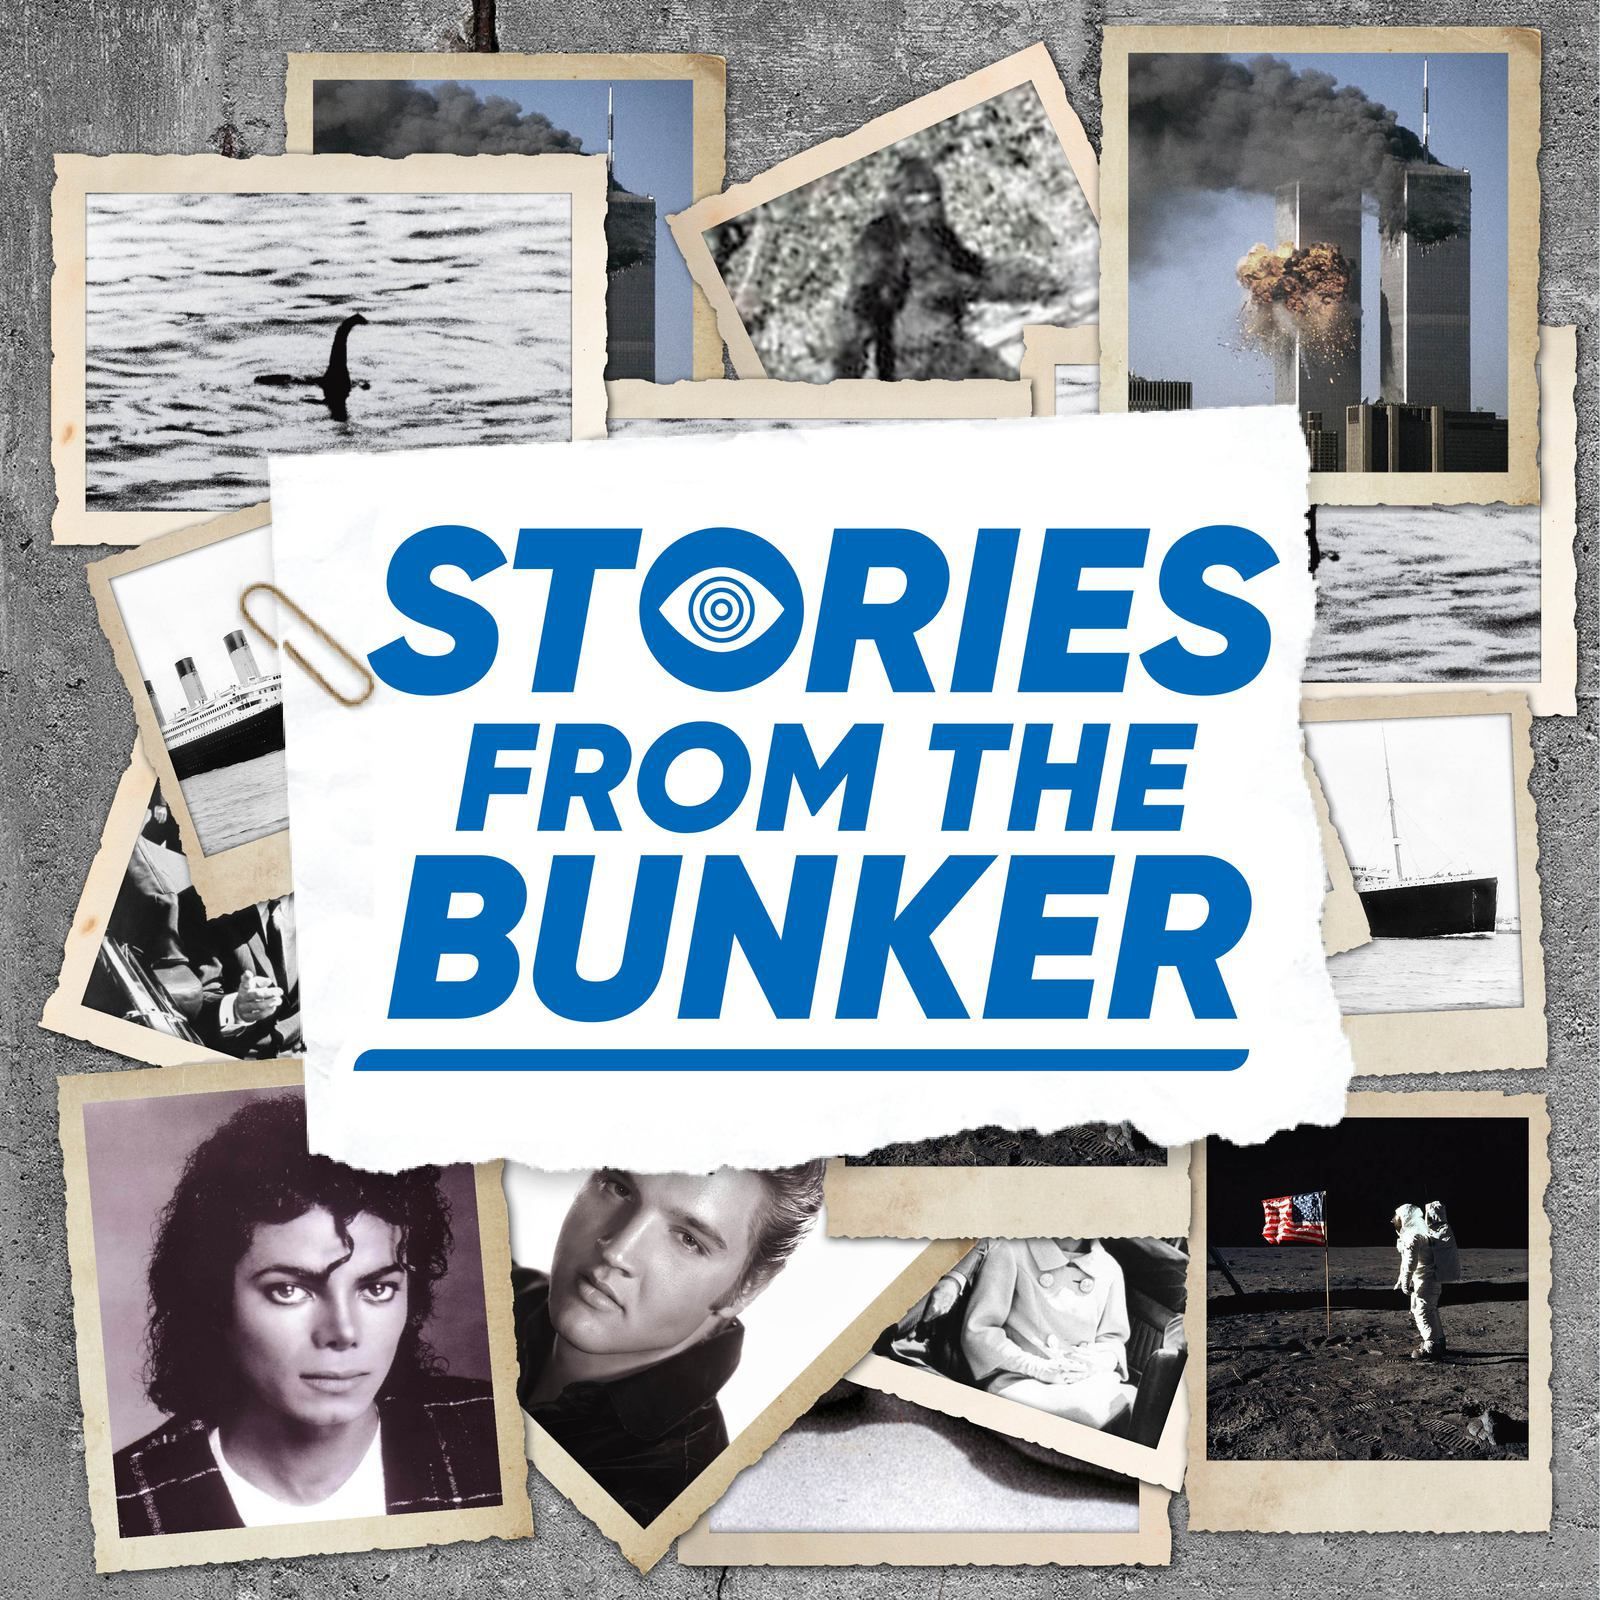 36: The USA's Plan to Defeat a Zombie Apocalypse | Stories From The Bunker #36